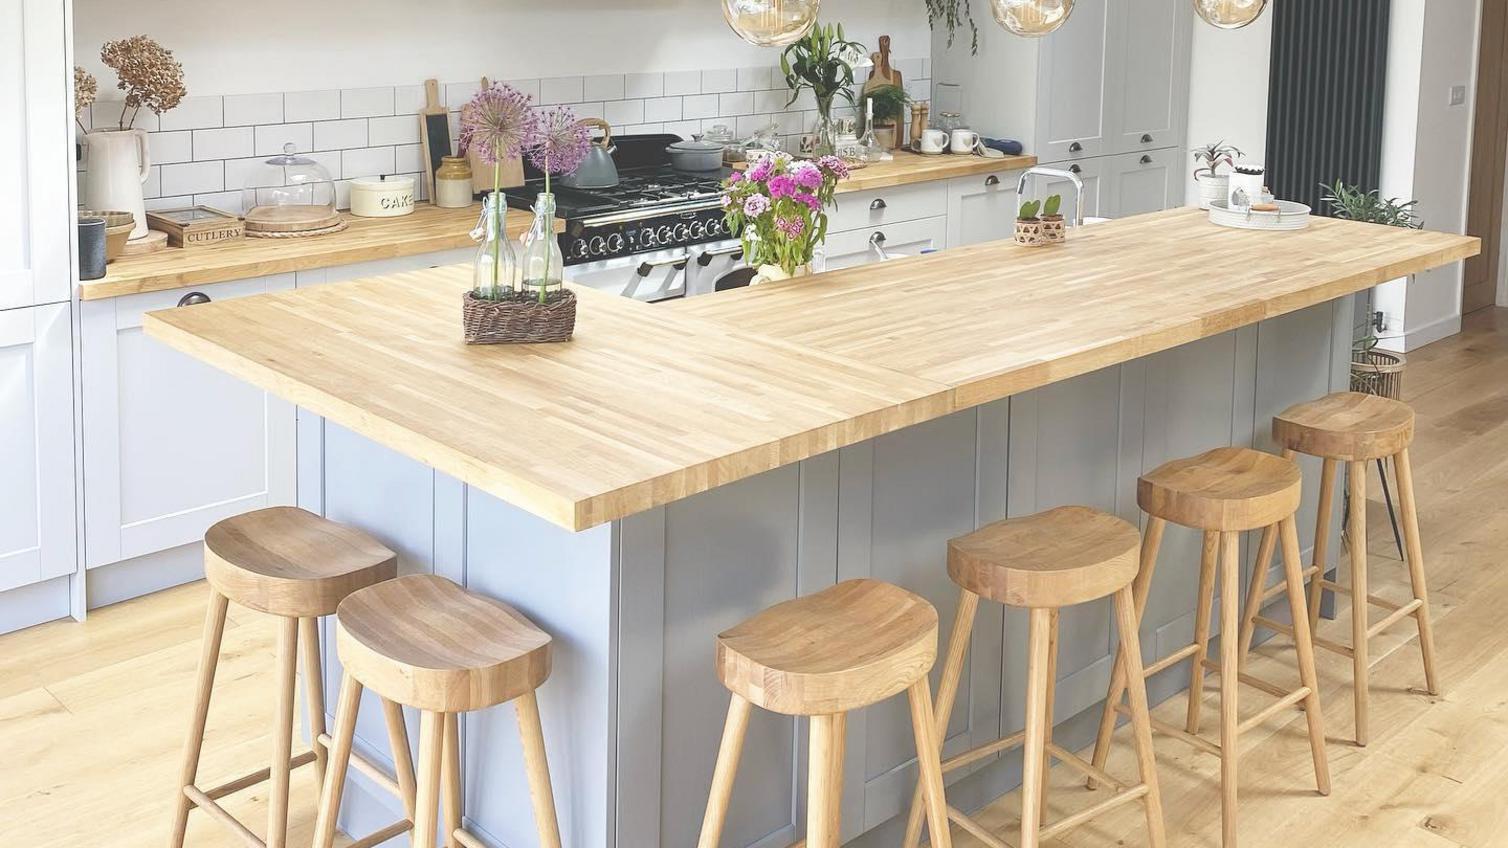 Country kitchen idea with light grey shaker cupboards, an island, oak worktops and matching oak stools.